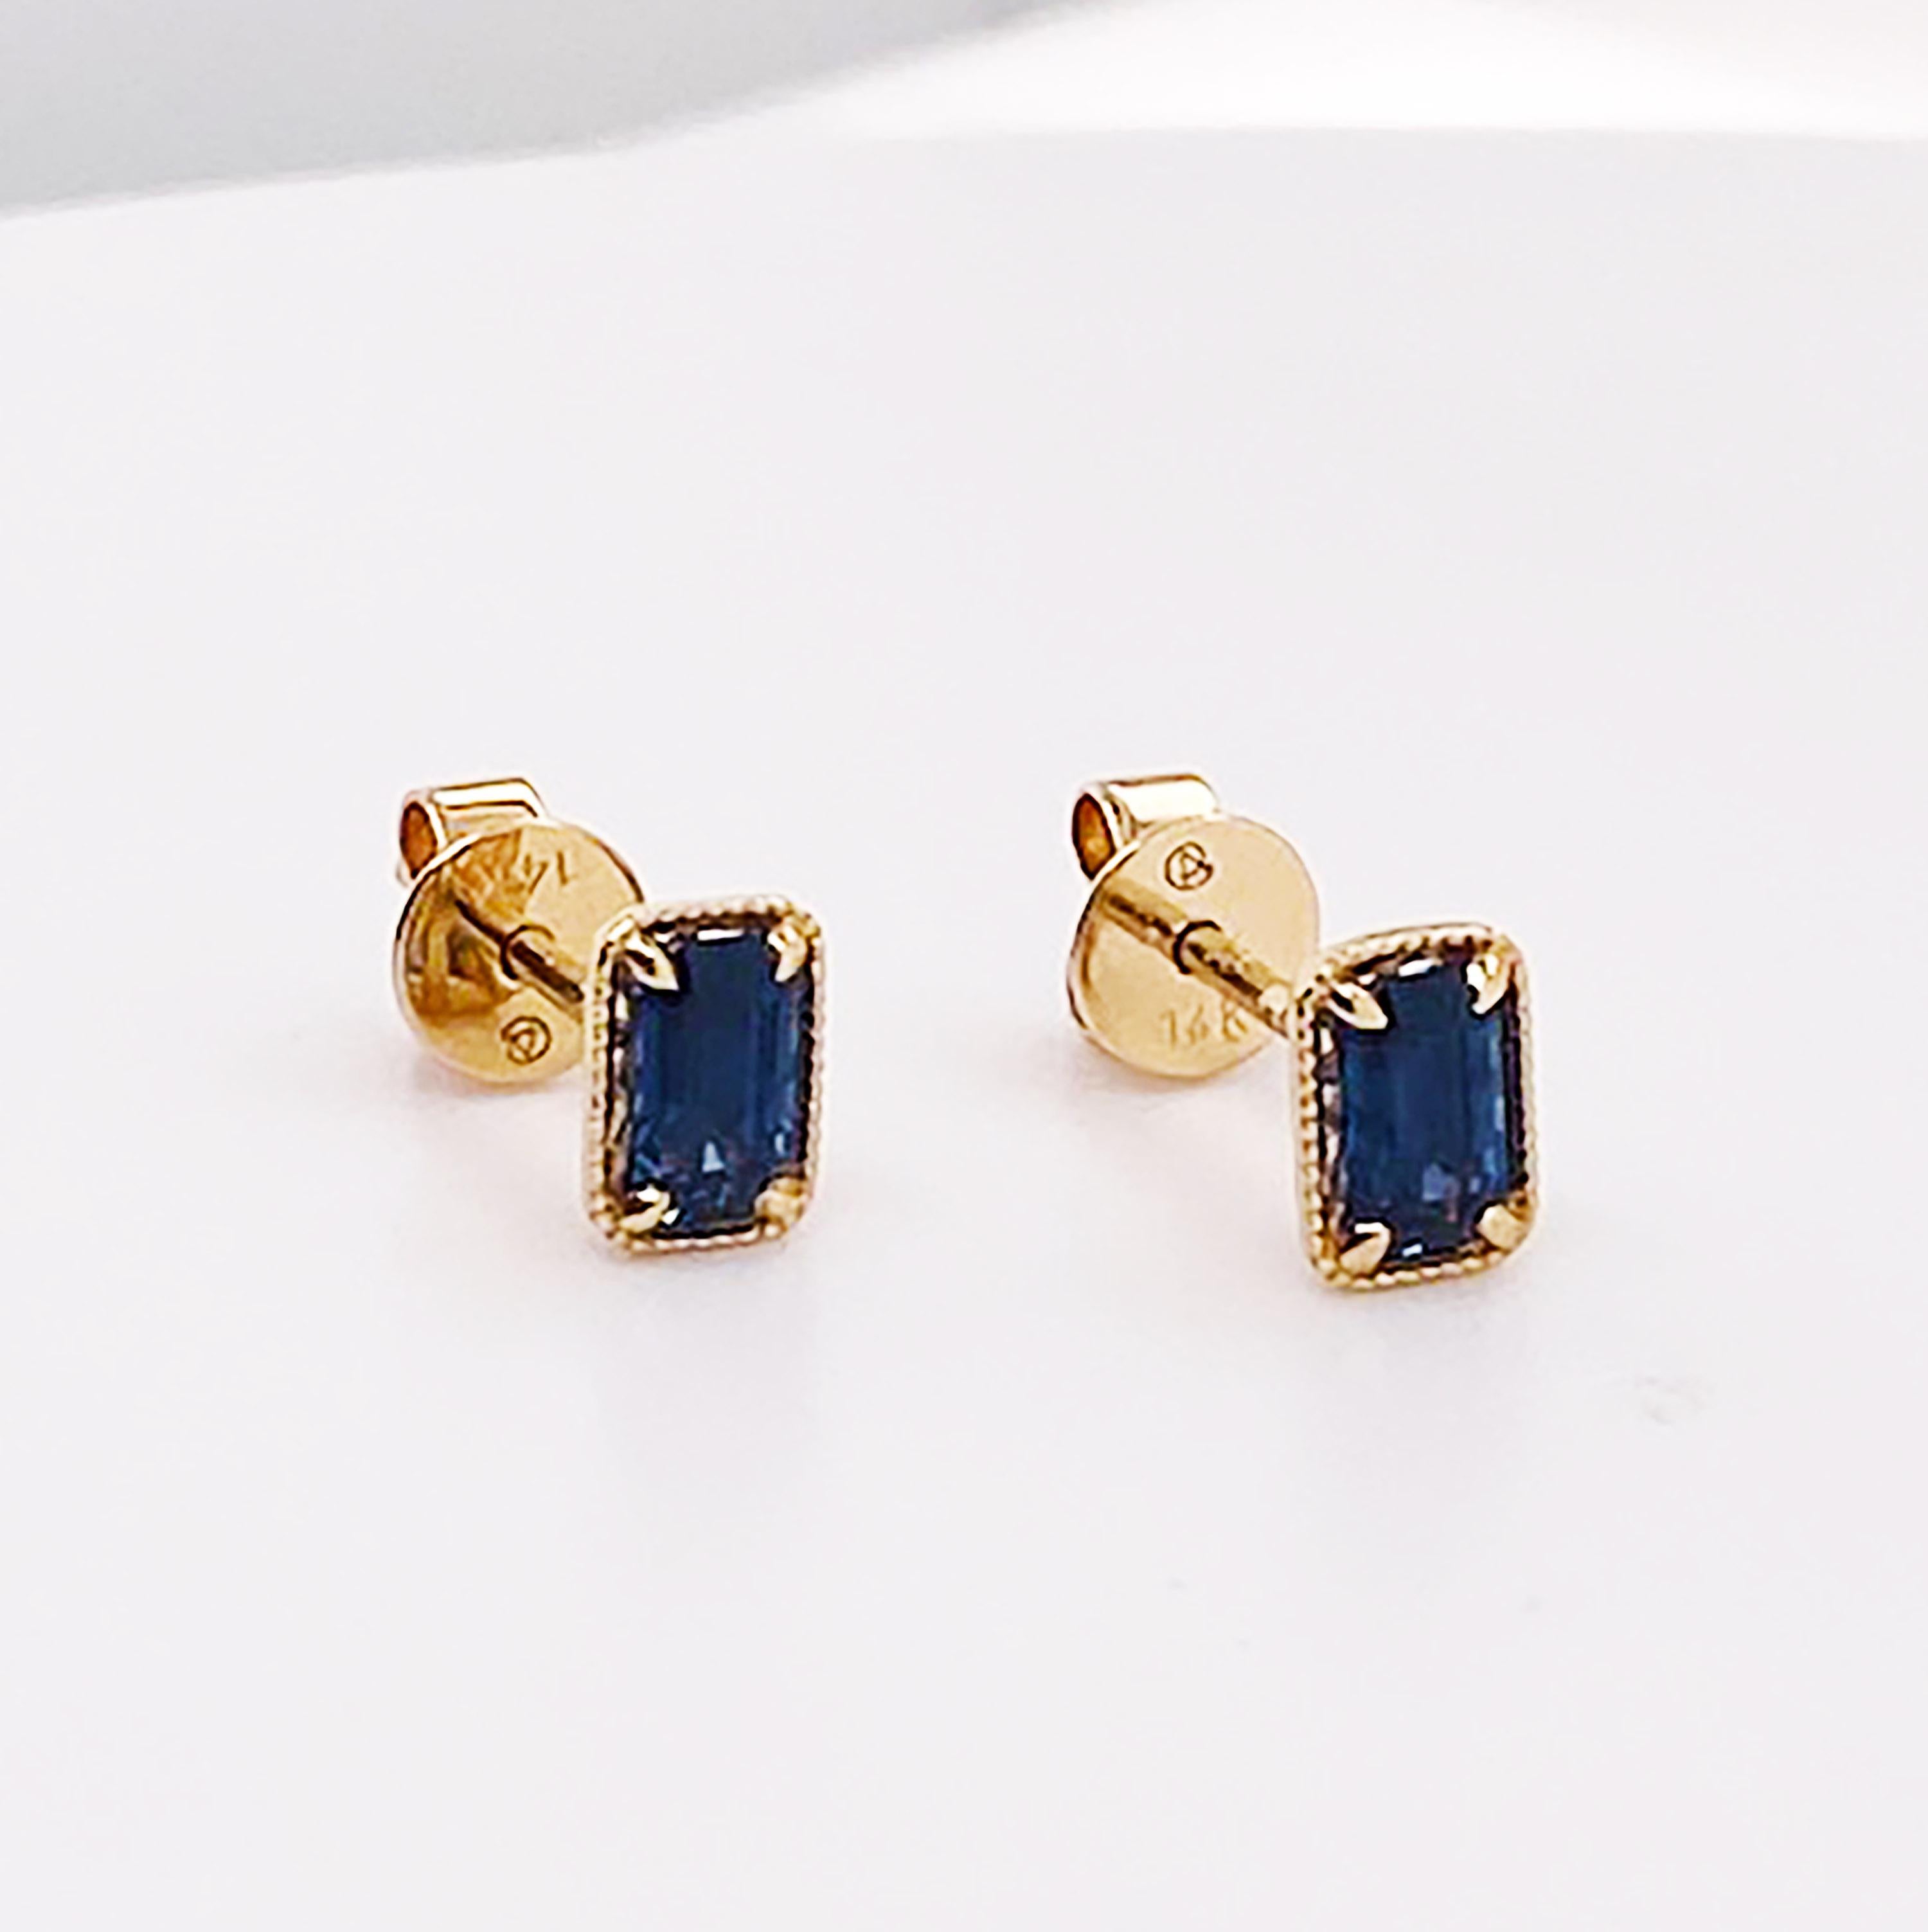 Sapphire Stud Earrings 14K Gold .80 Carat Emerald Cut Sapphire September Earring In New Condition For Sale In Austin, TX